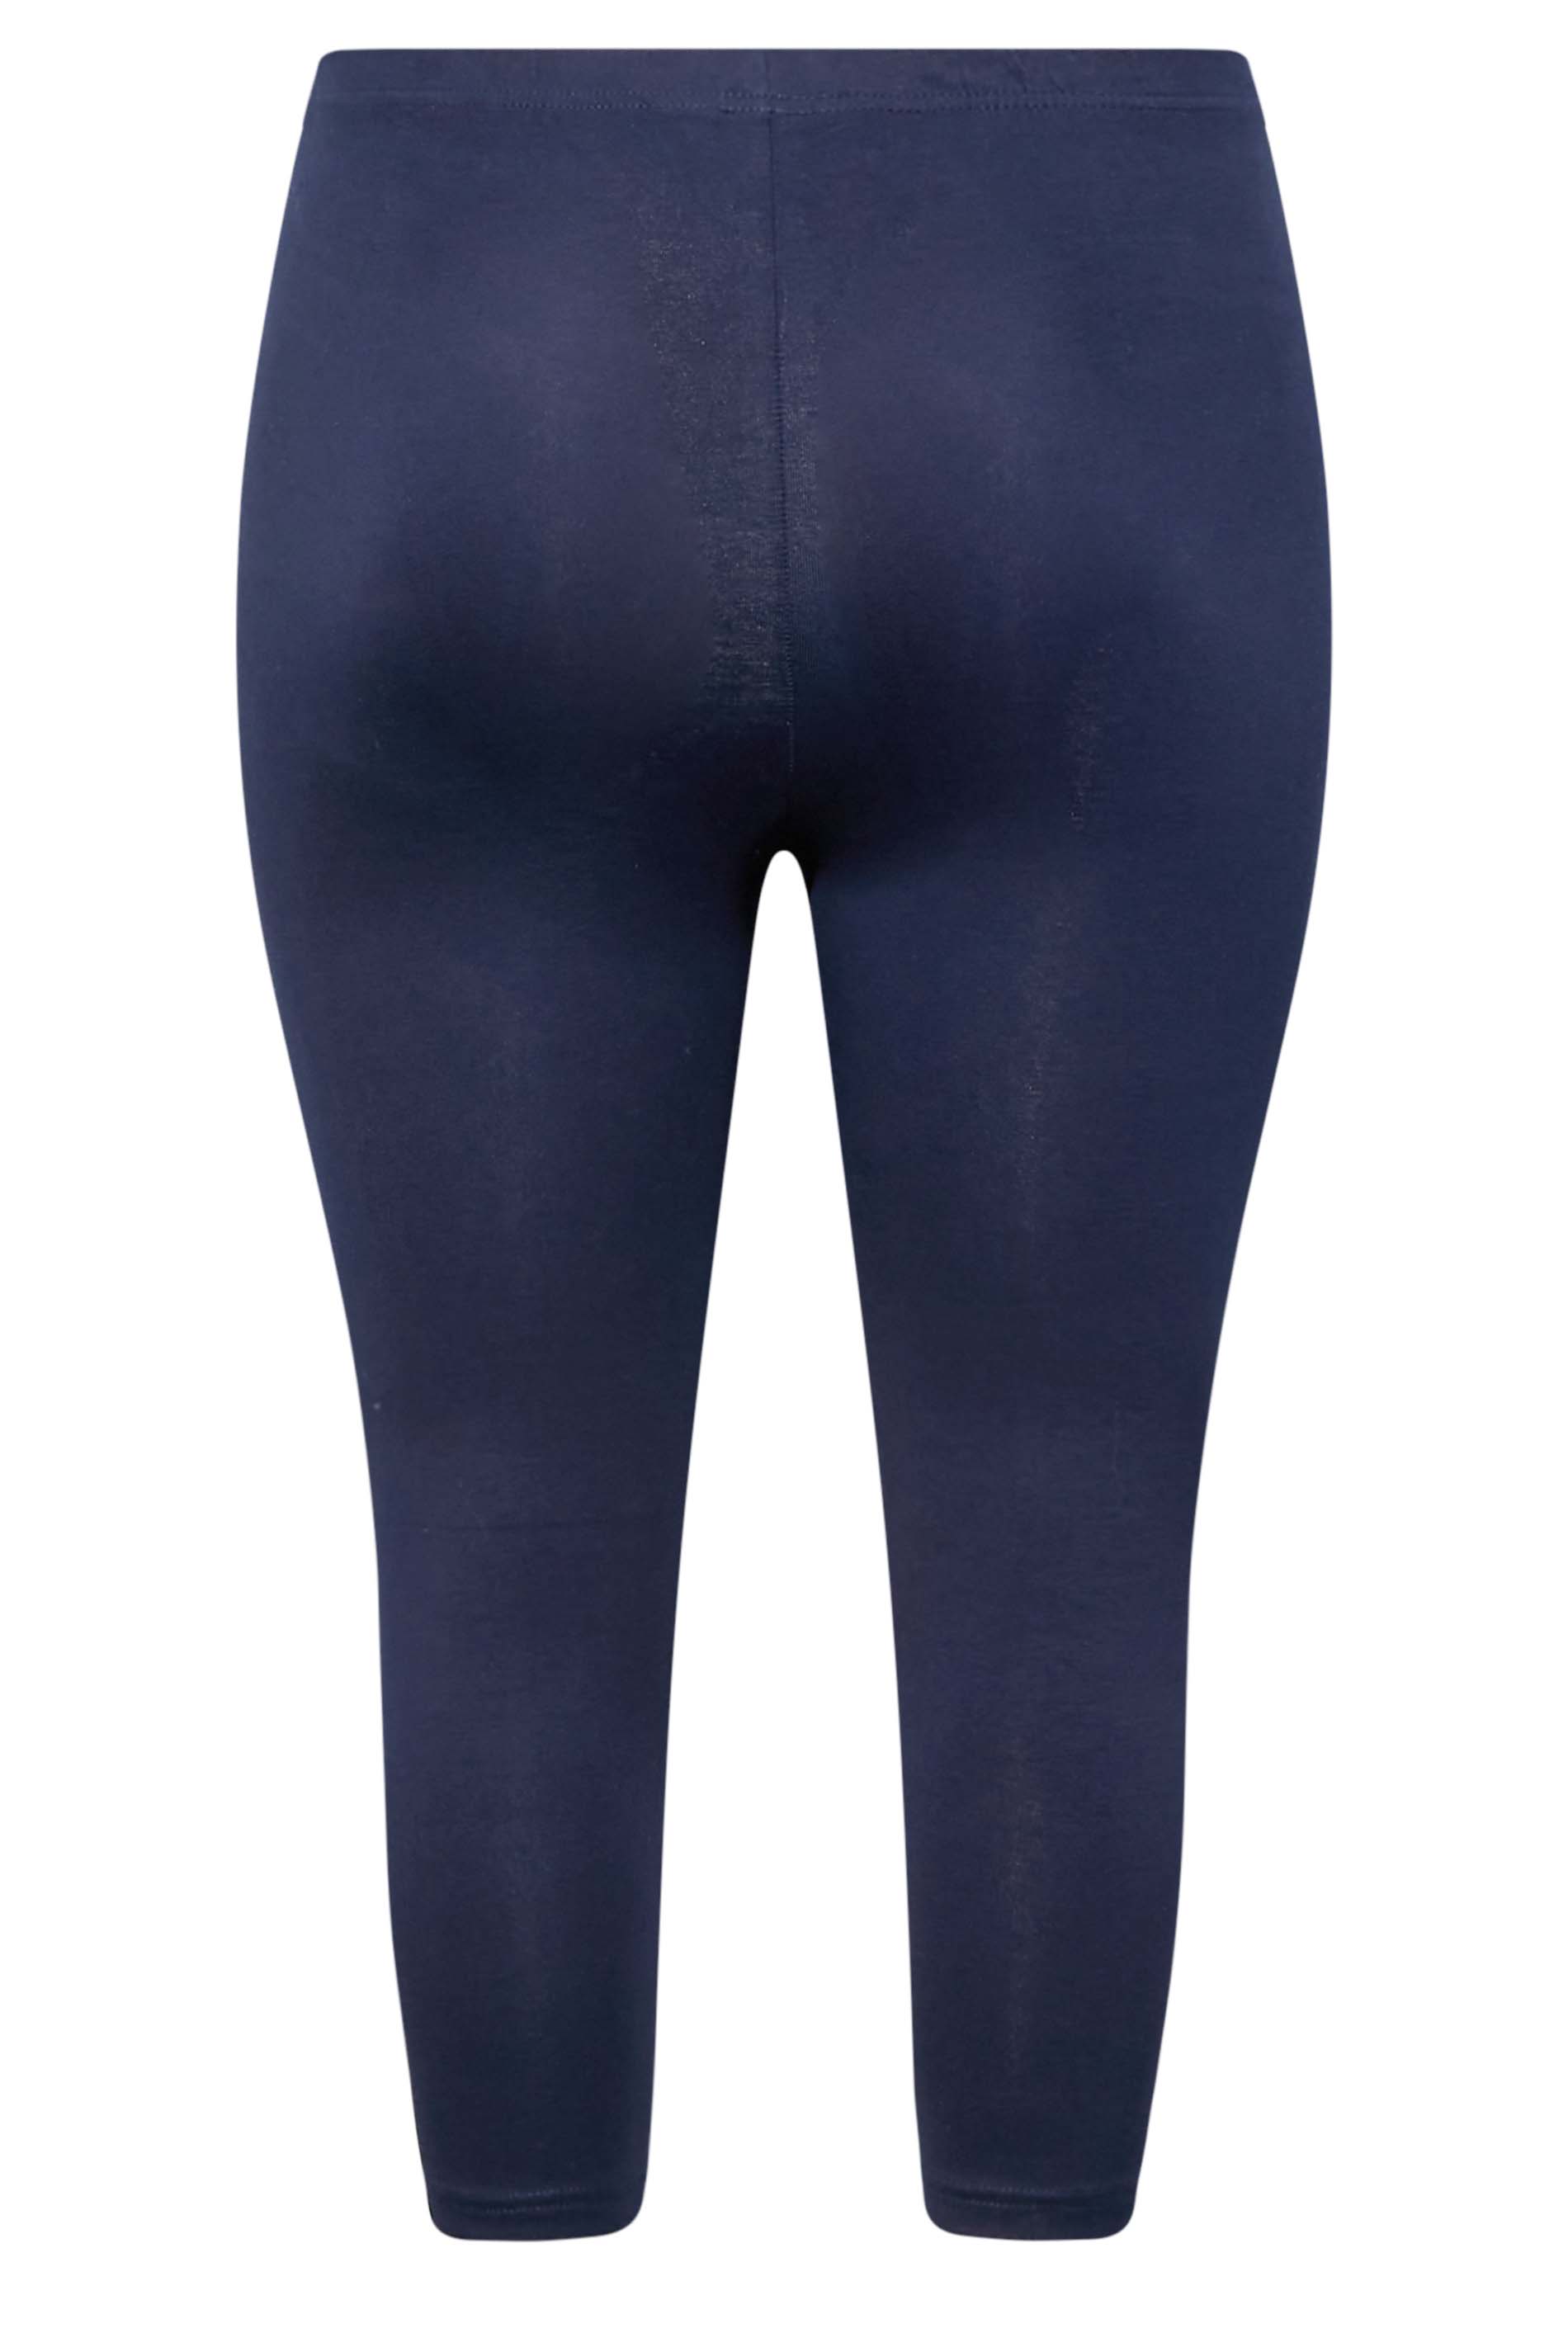 Plus Size YOURS FOR GOOD Navy Blue Cotton Stretch Cropped Leggings